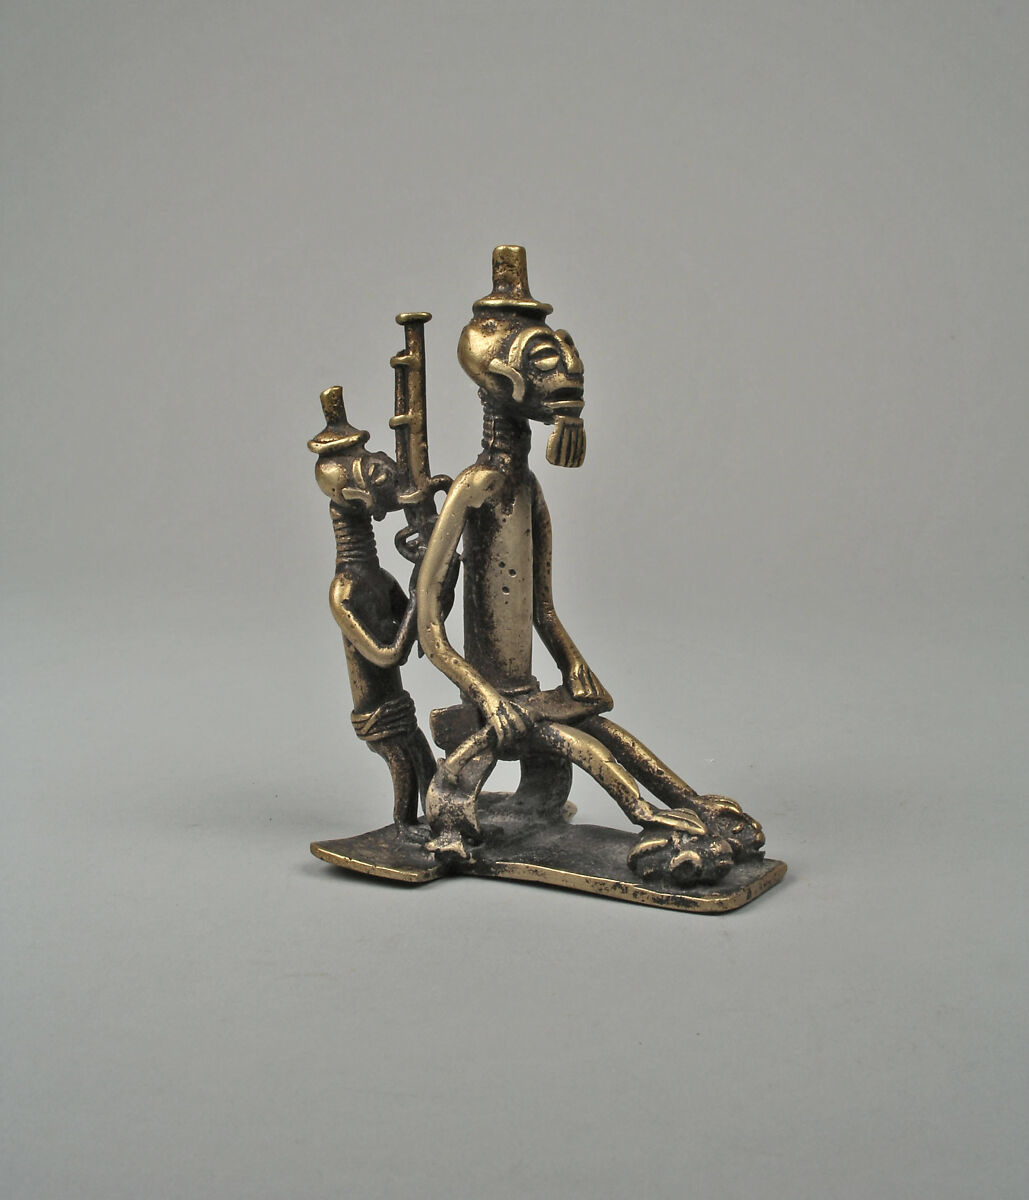 Gold Weight: Chief with Attendant, Brass, Yoruba peoples 